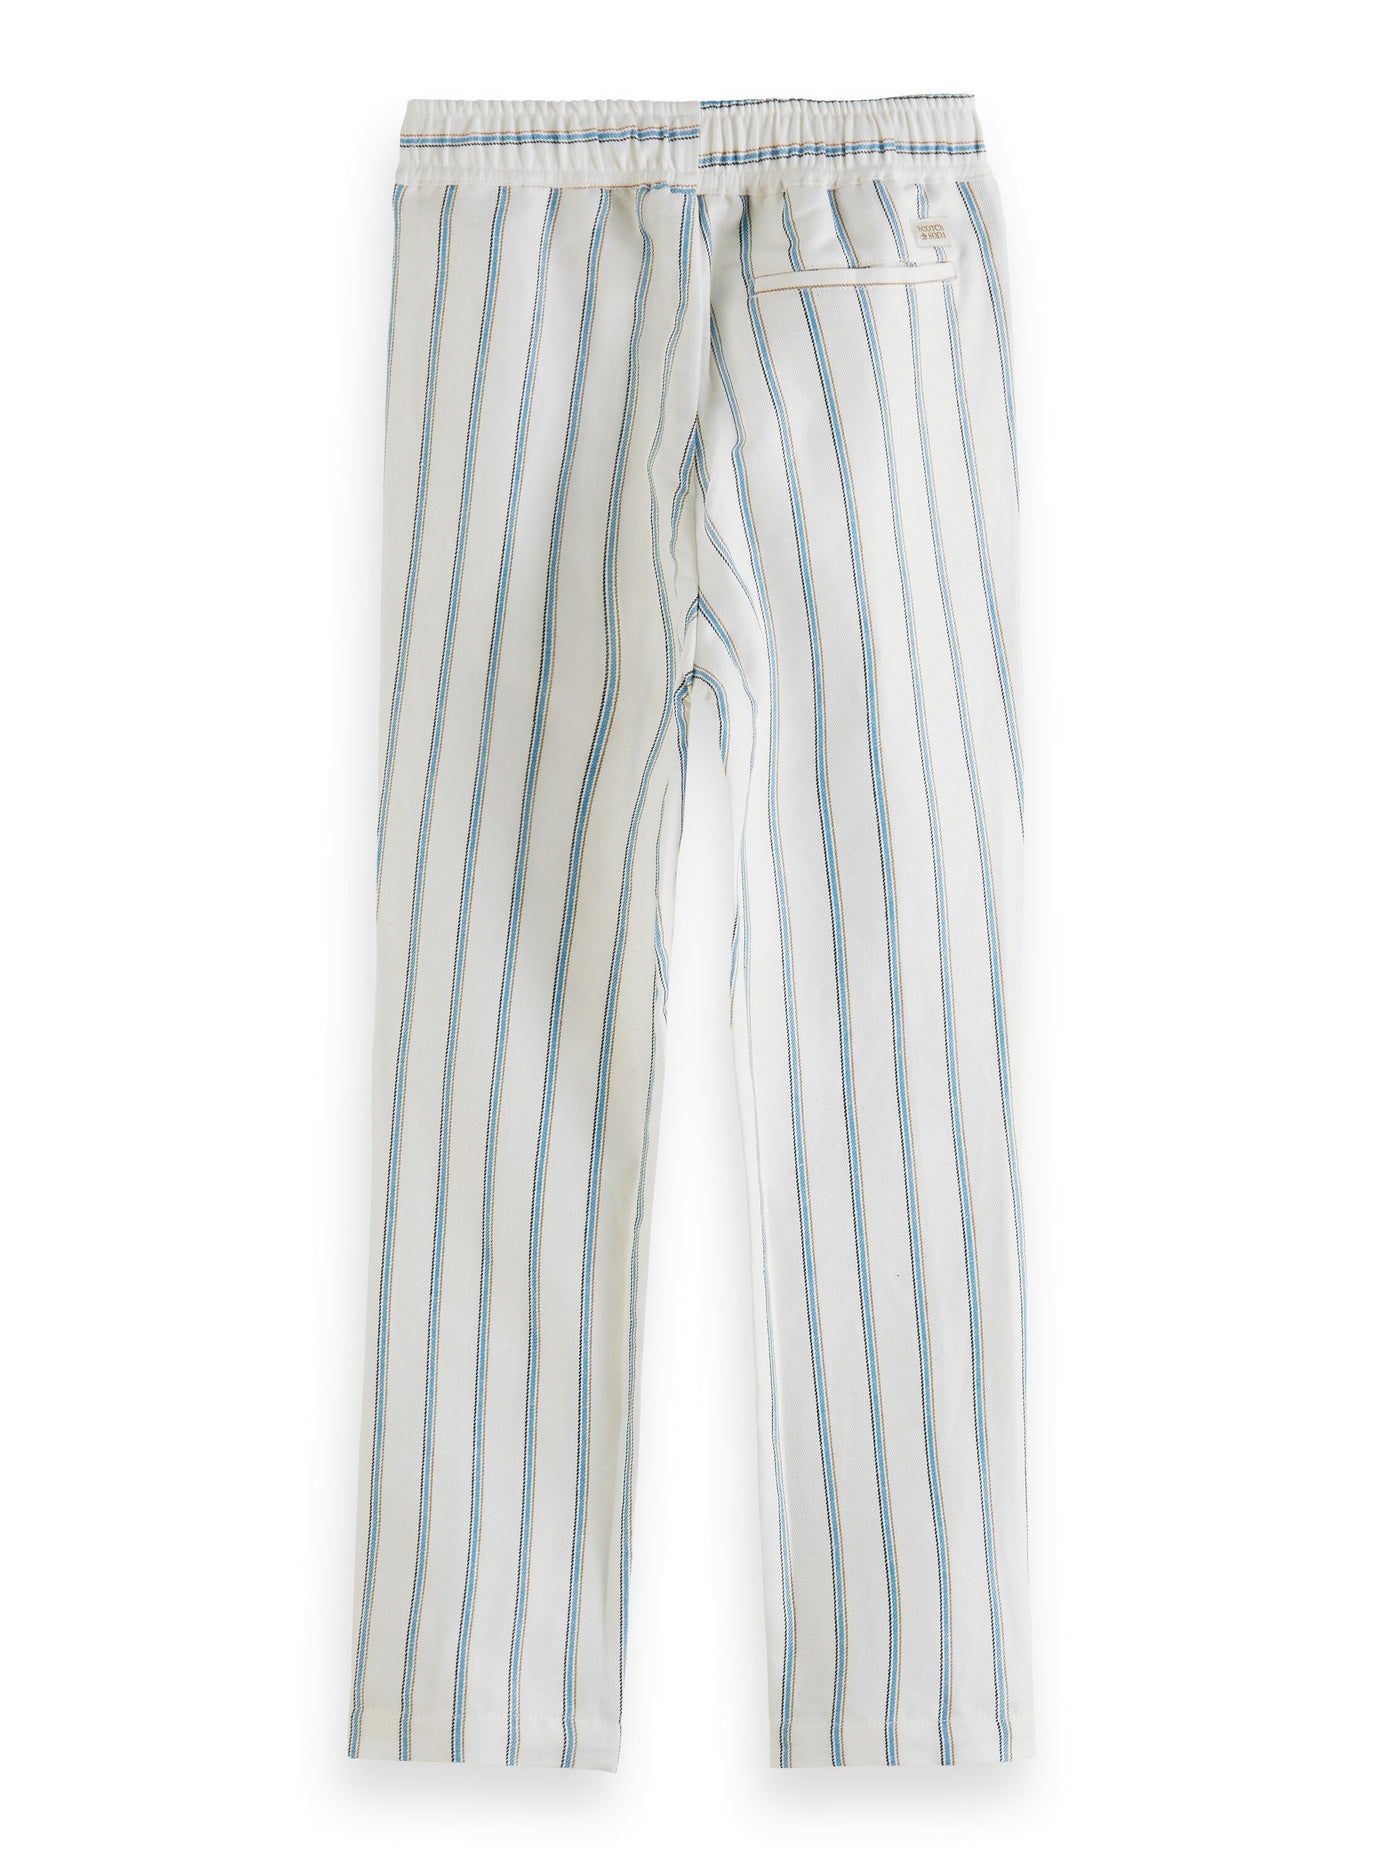 Relaxed Slim Fit Linen Pants - COCO LETO